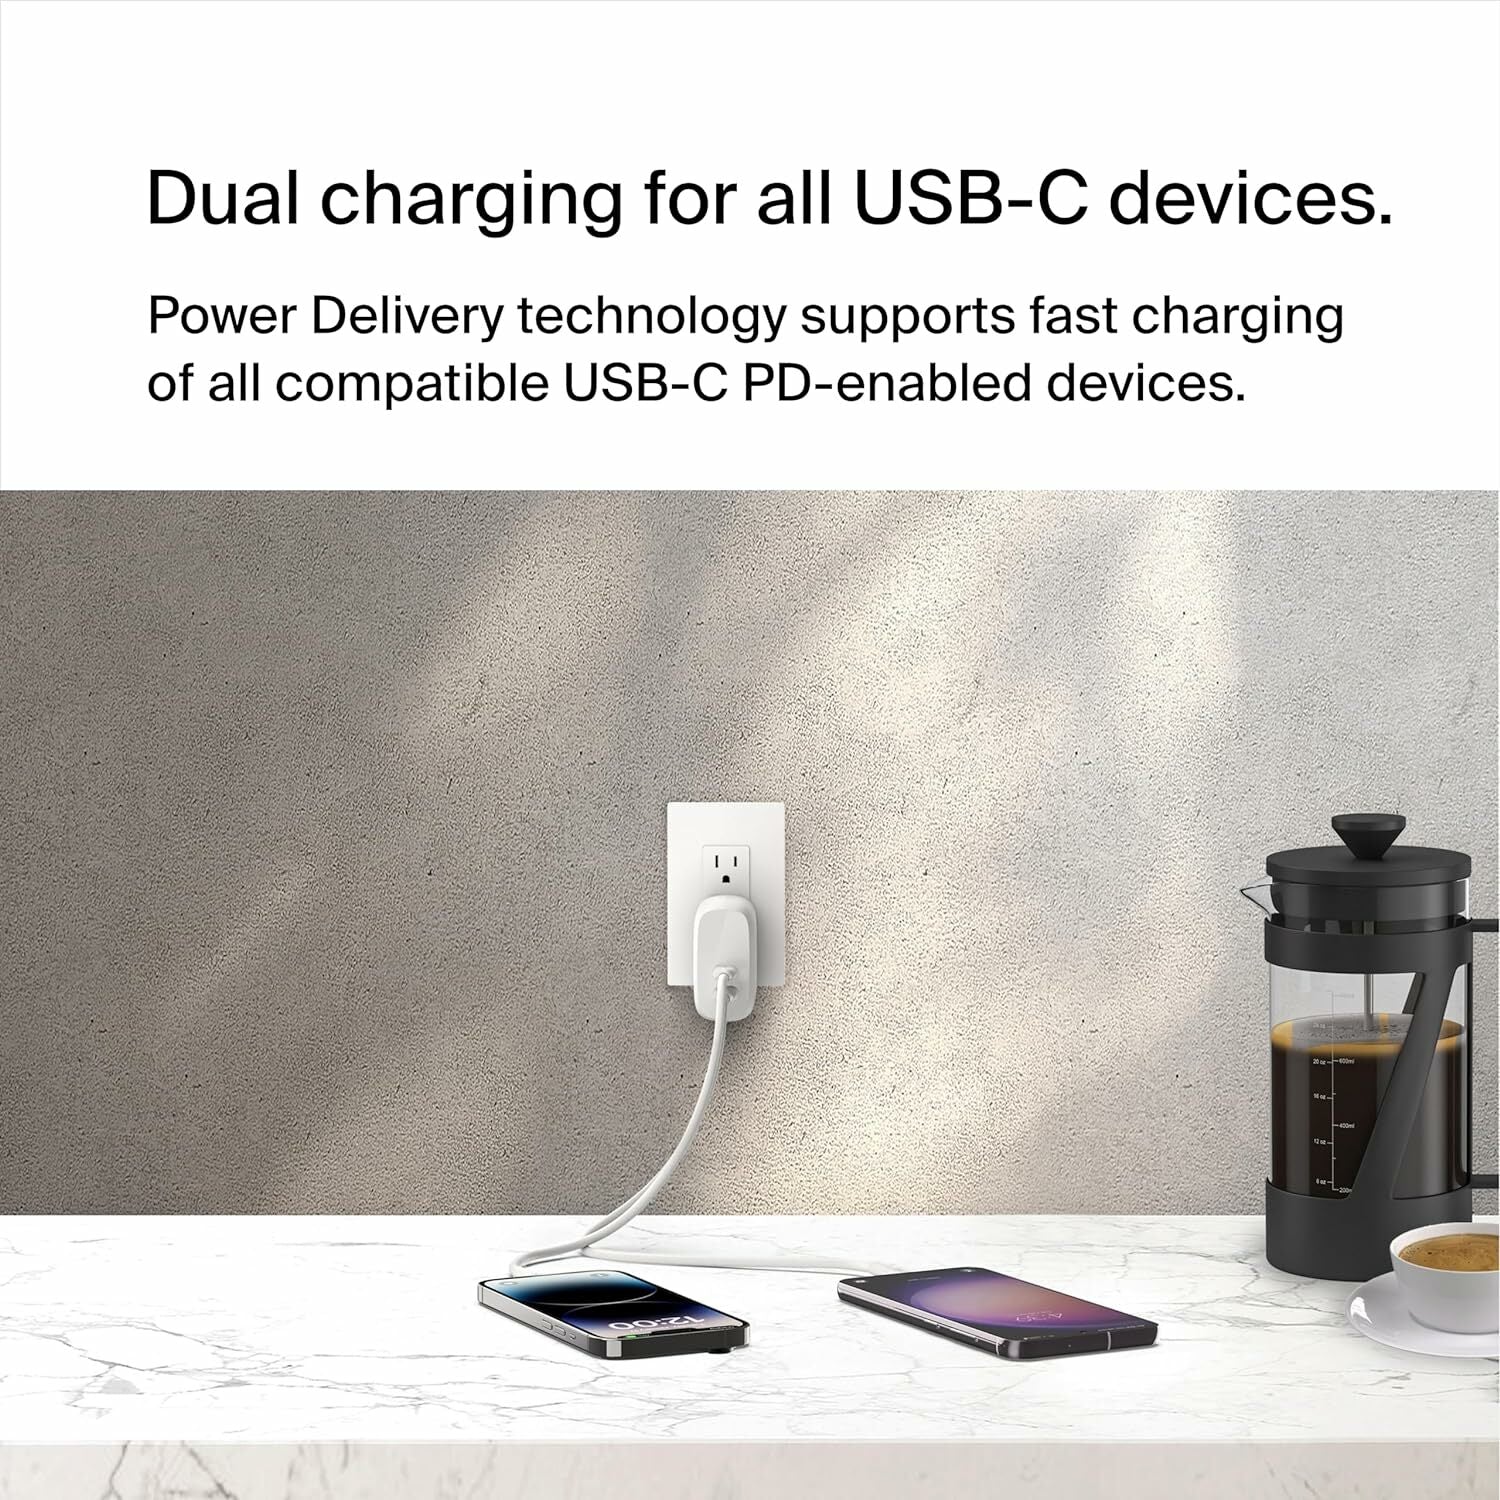 Belkin BoostCharge Pro USB-C® Wall Charger with PPS 60W Dual Fast Charging for iPhone, iPad, Galaxy & More